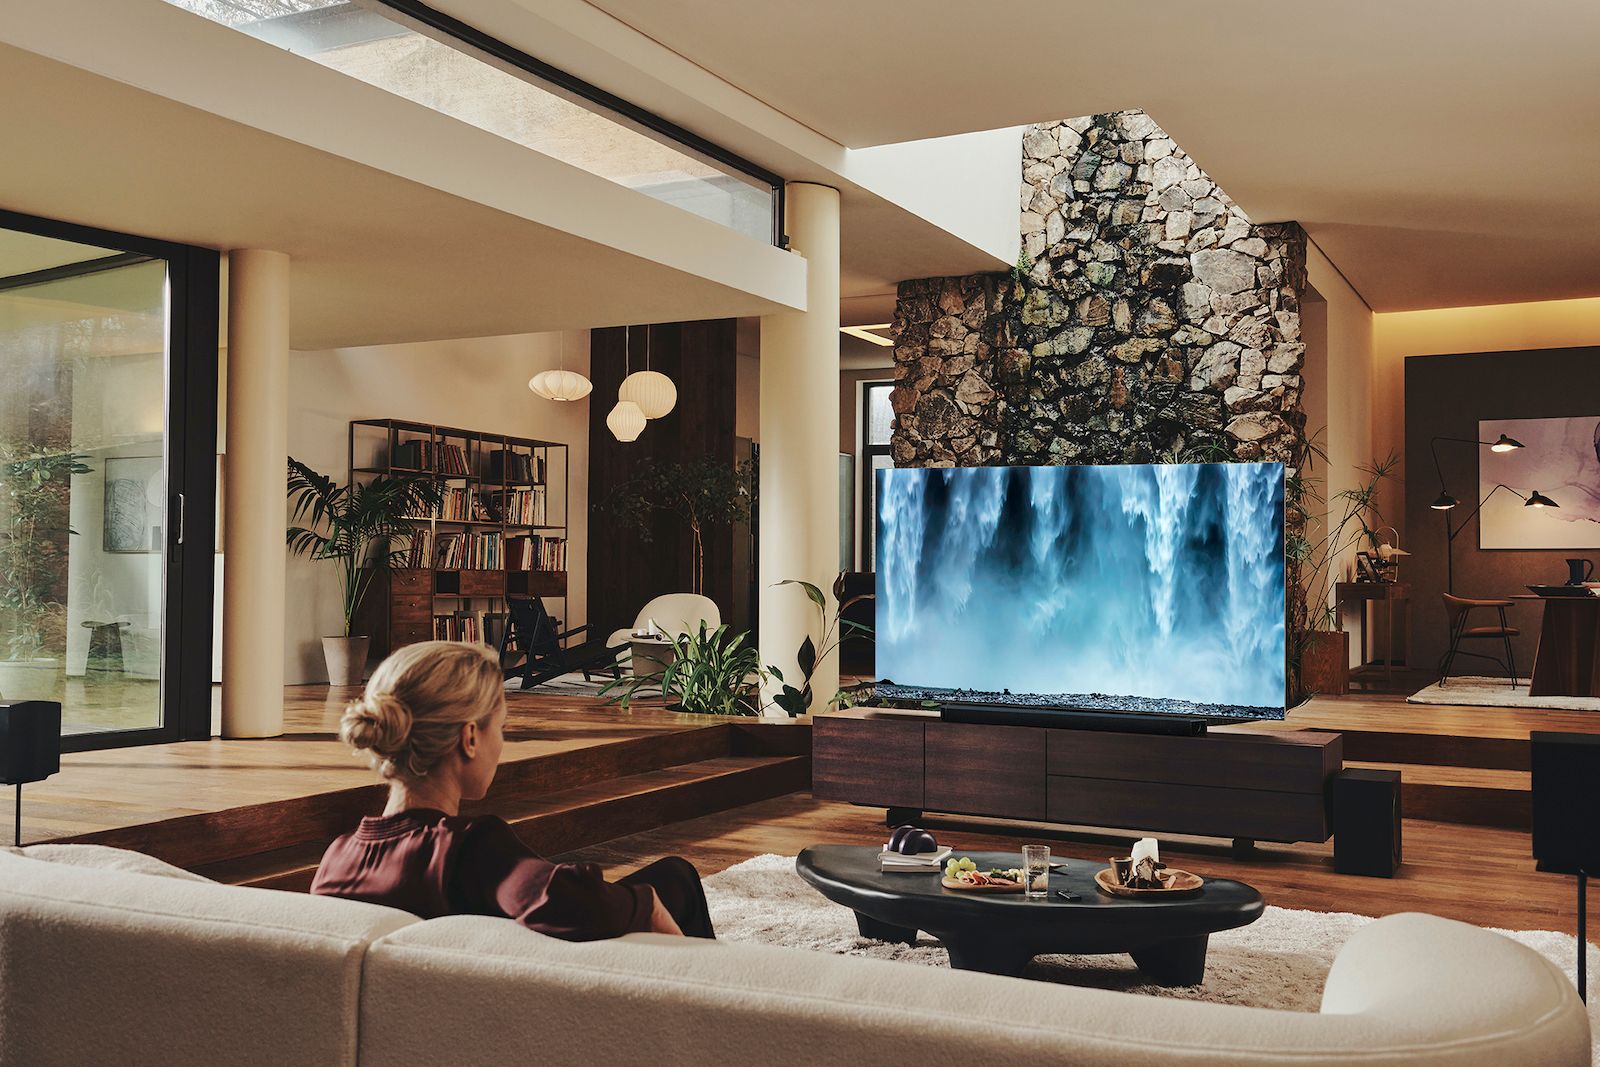 Best soundbars for every budget in 2023